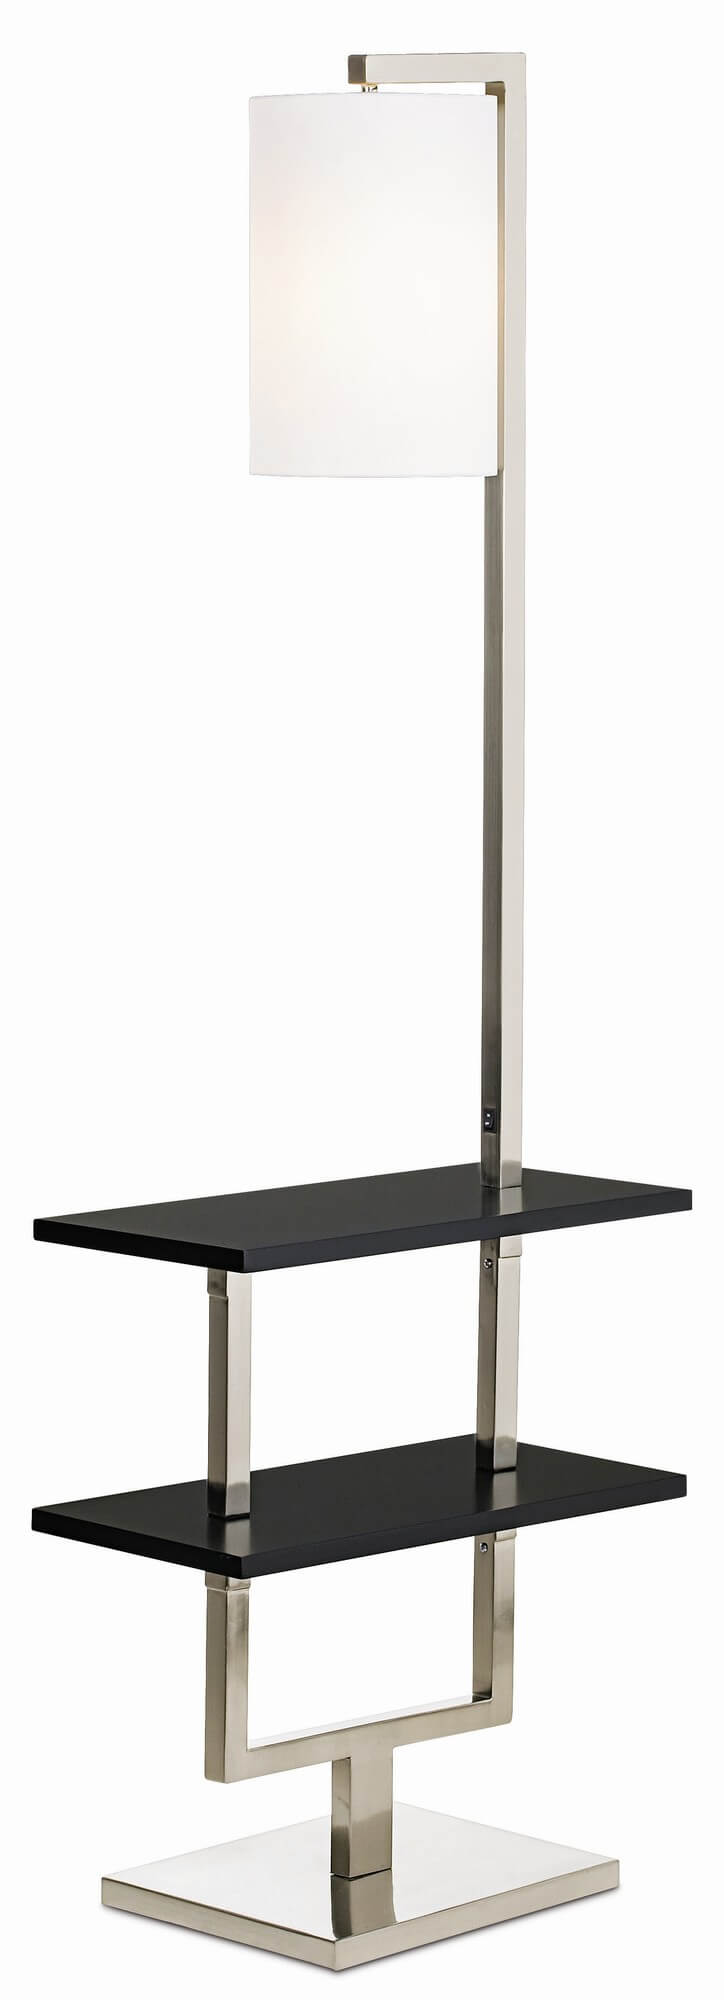 Our second table design floor lamp features a combination brushed nickel and steel frame, with two-tiered table in black.